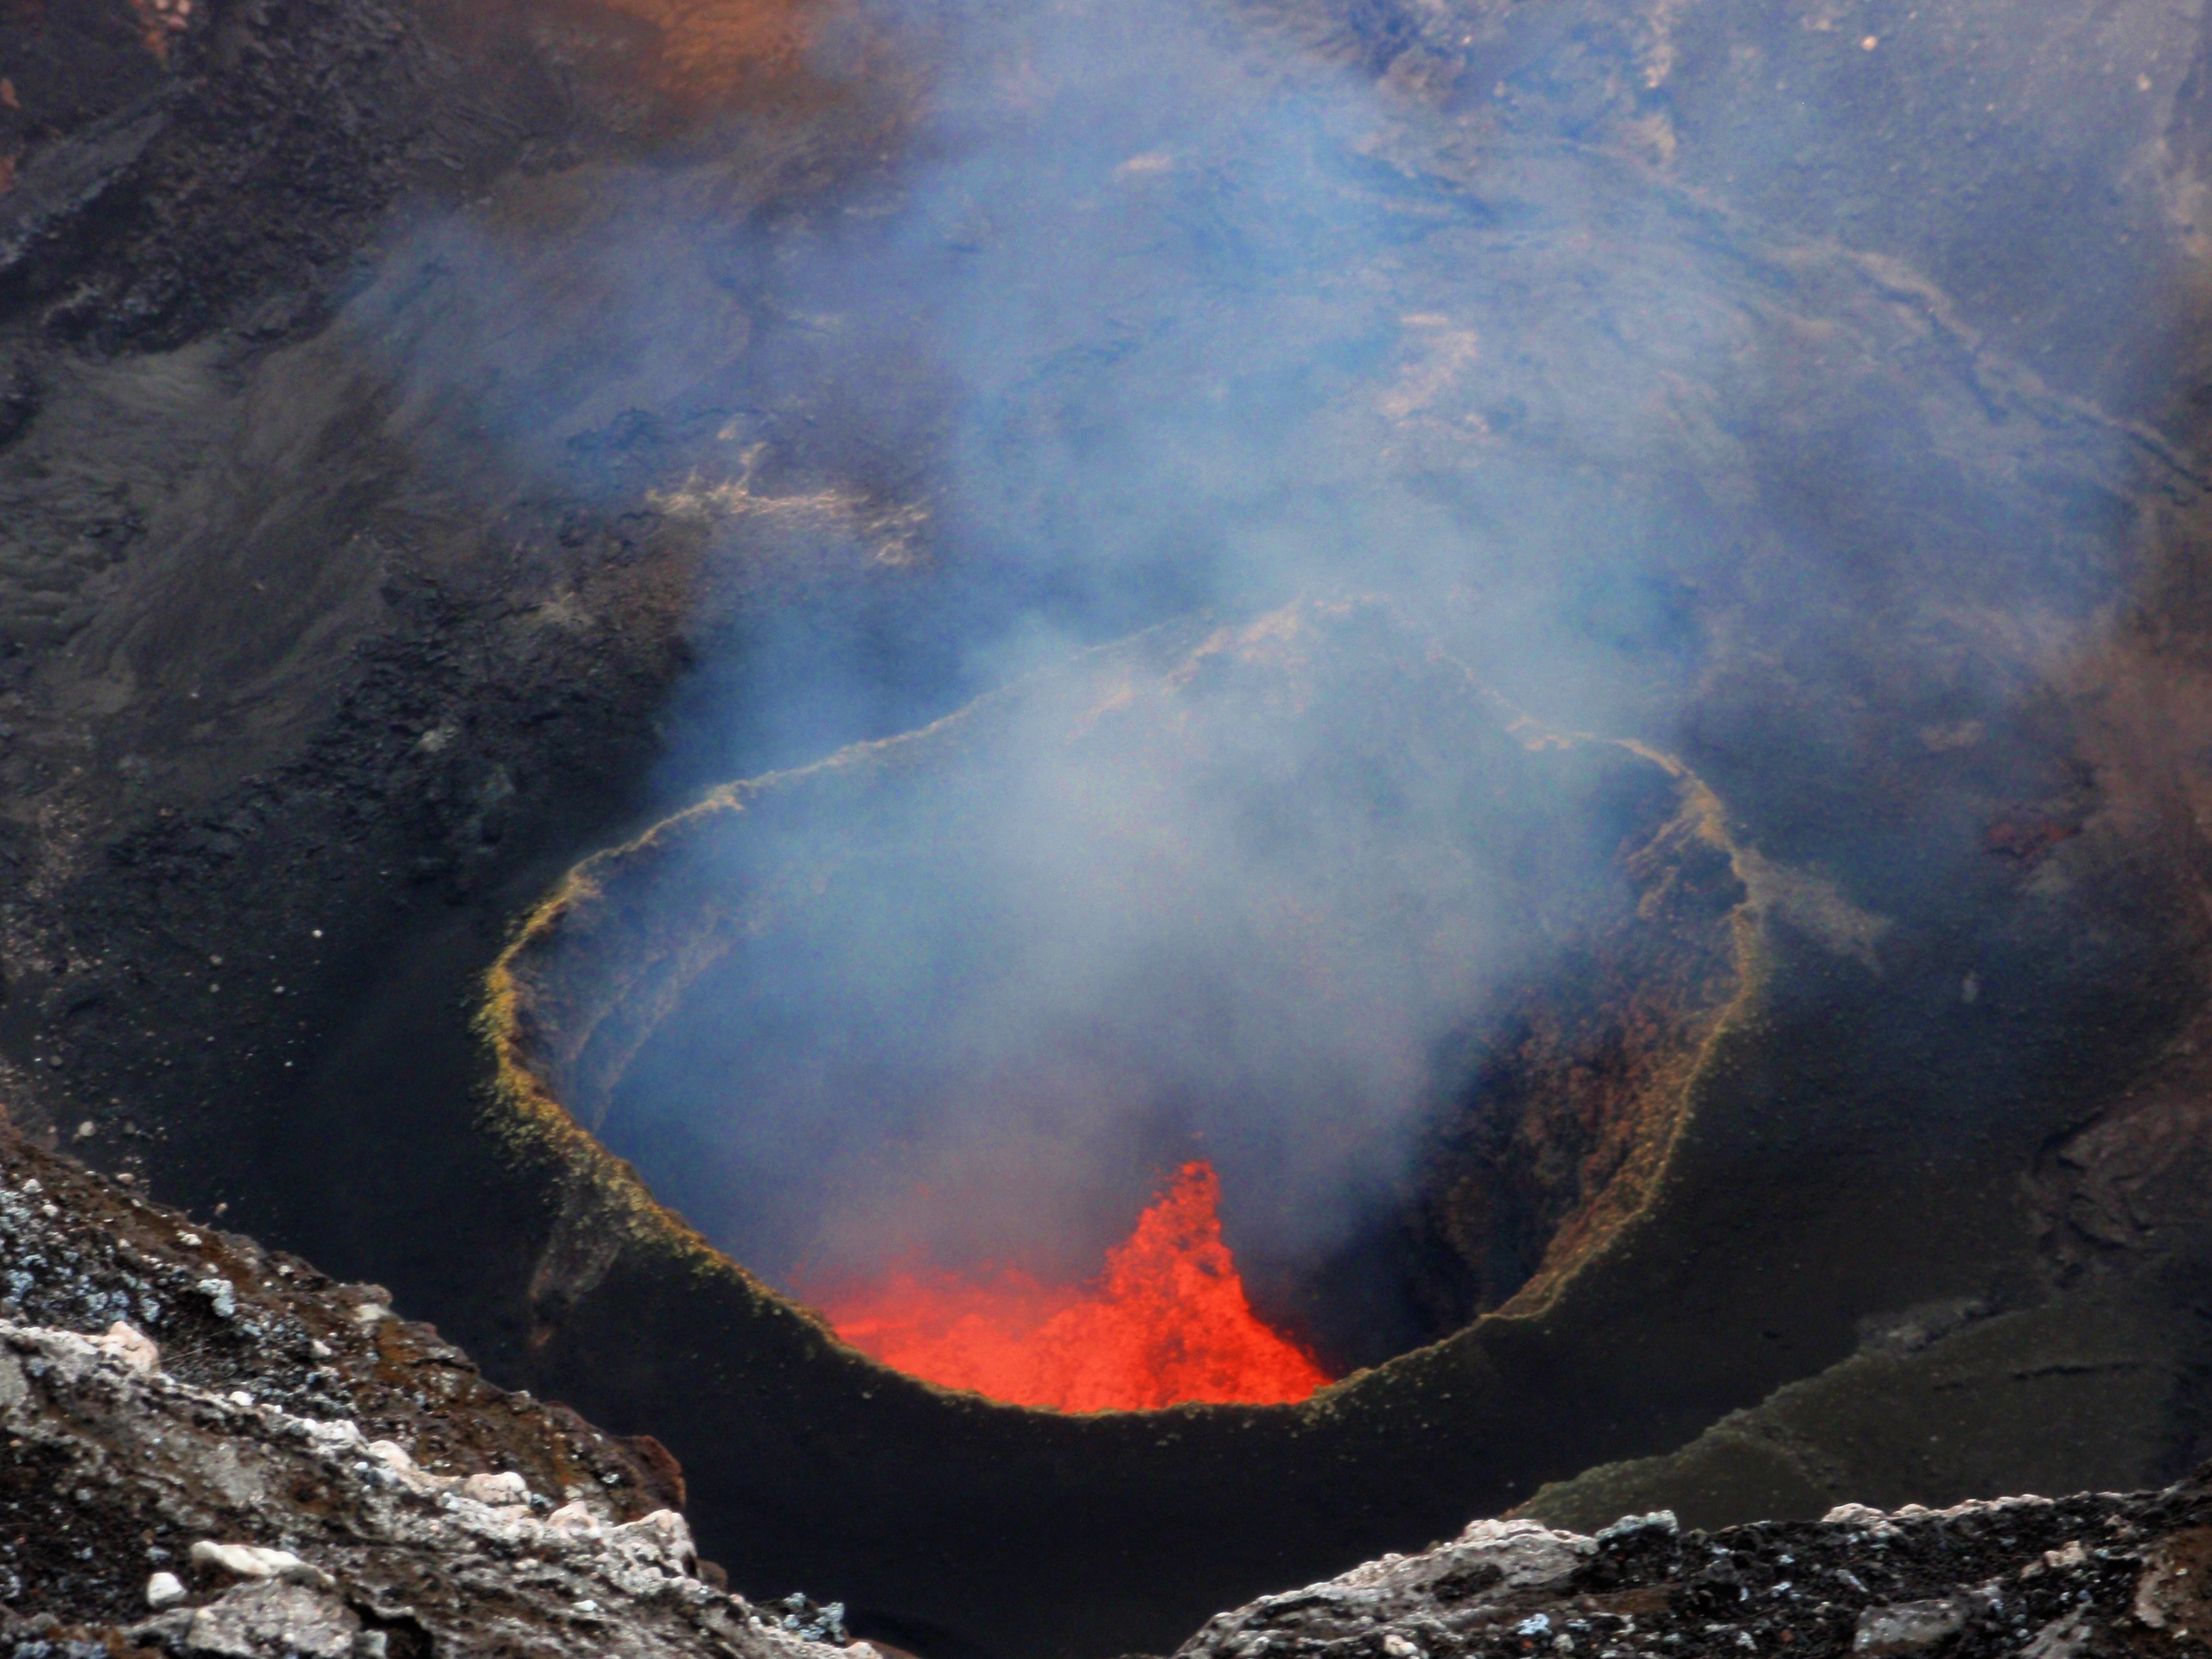 Drones Mapped This Giant Volcano, And The 3D Rendering Is Awesome